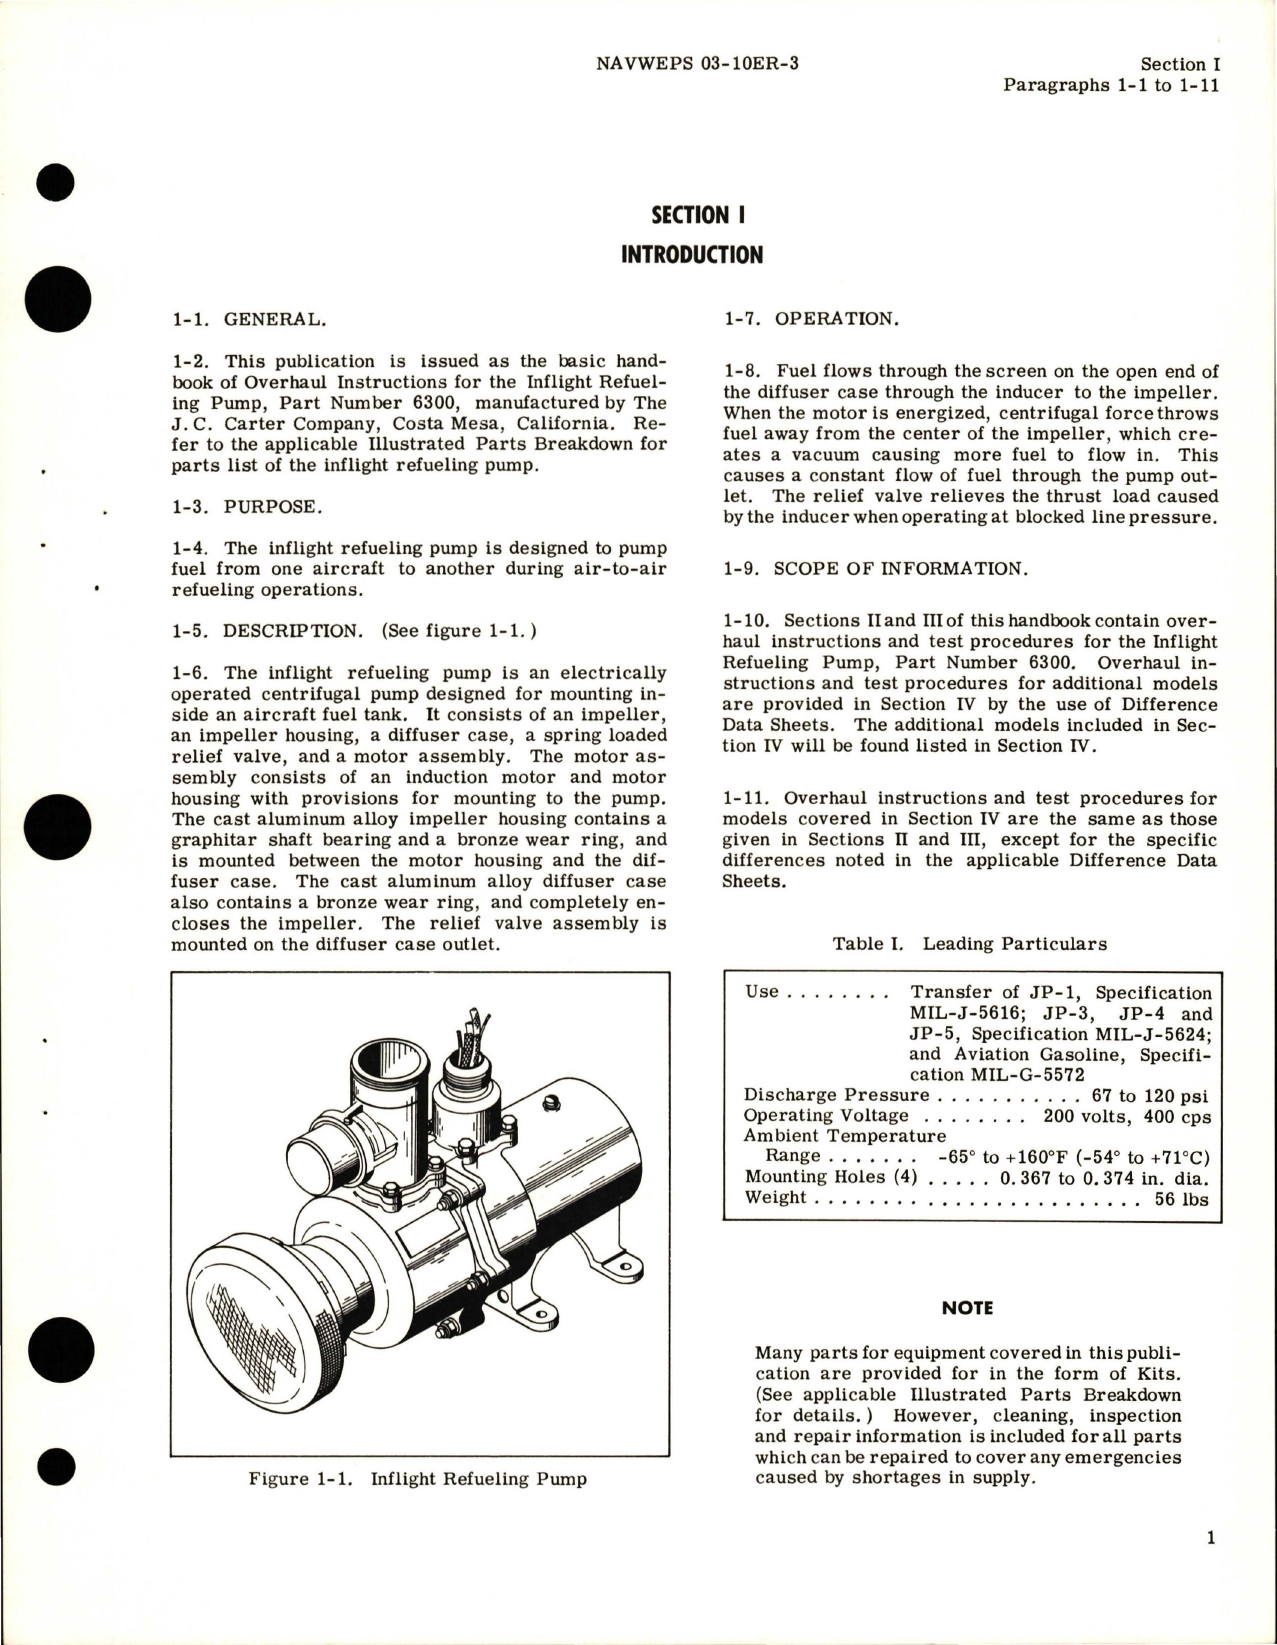 Sample page 5 from AirCorps Library document: Overhaul Instructions for Inflight Refueling Pump - Part 6300 and 6300-1 